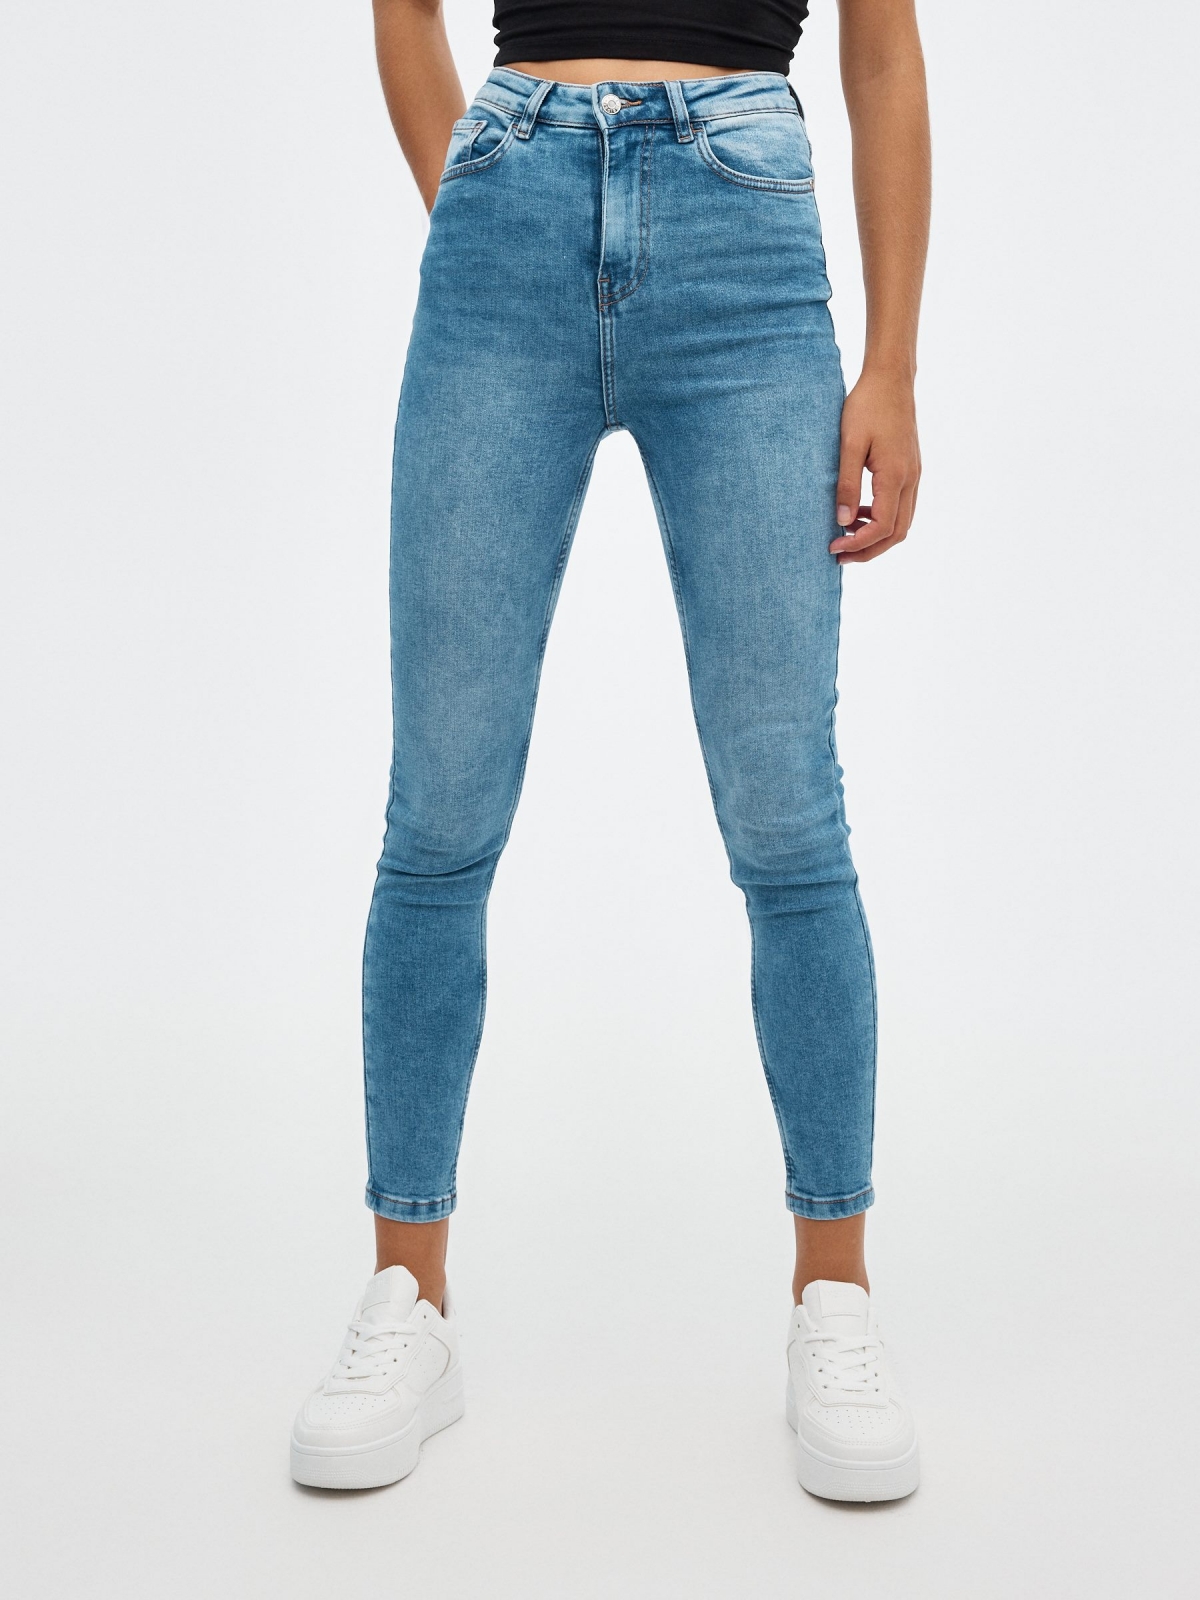 Denim skinny jeans high rise blue middle front view